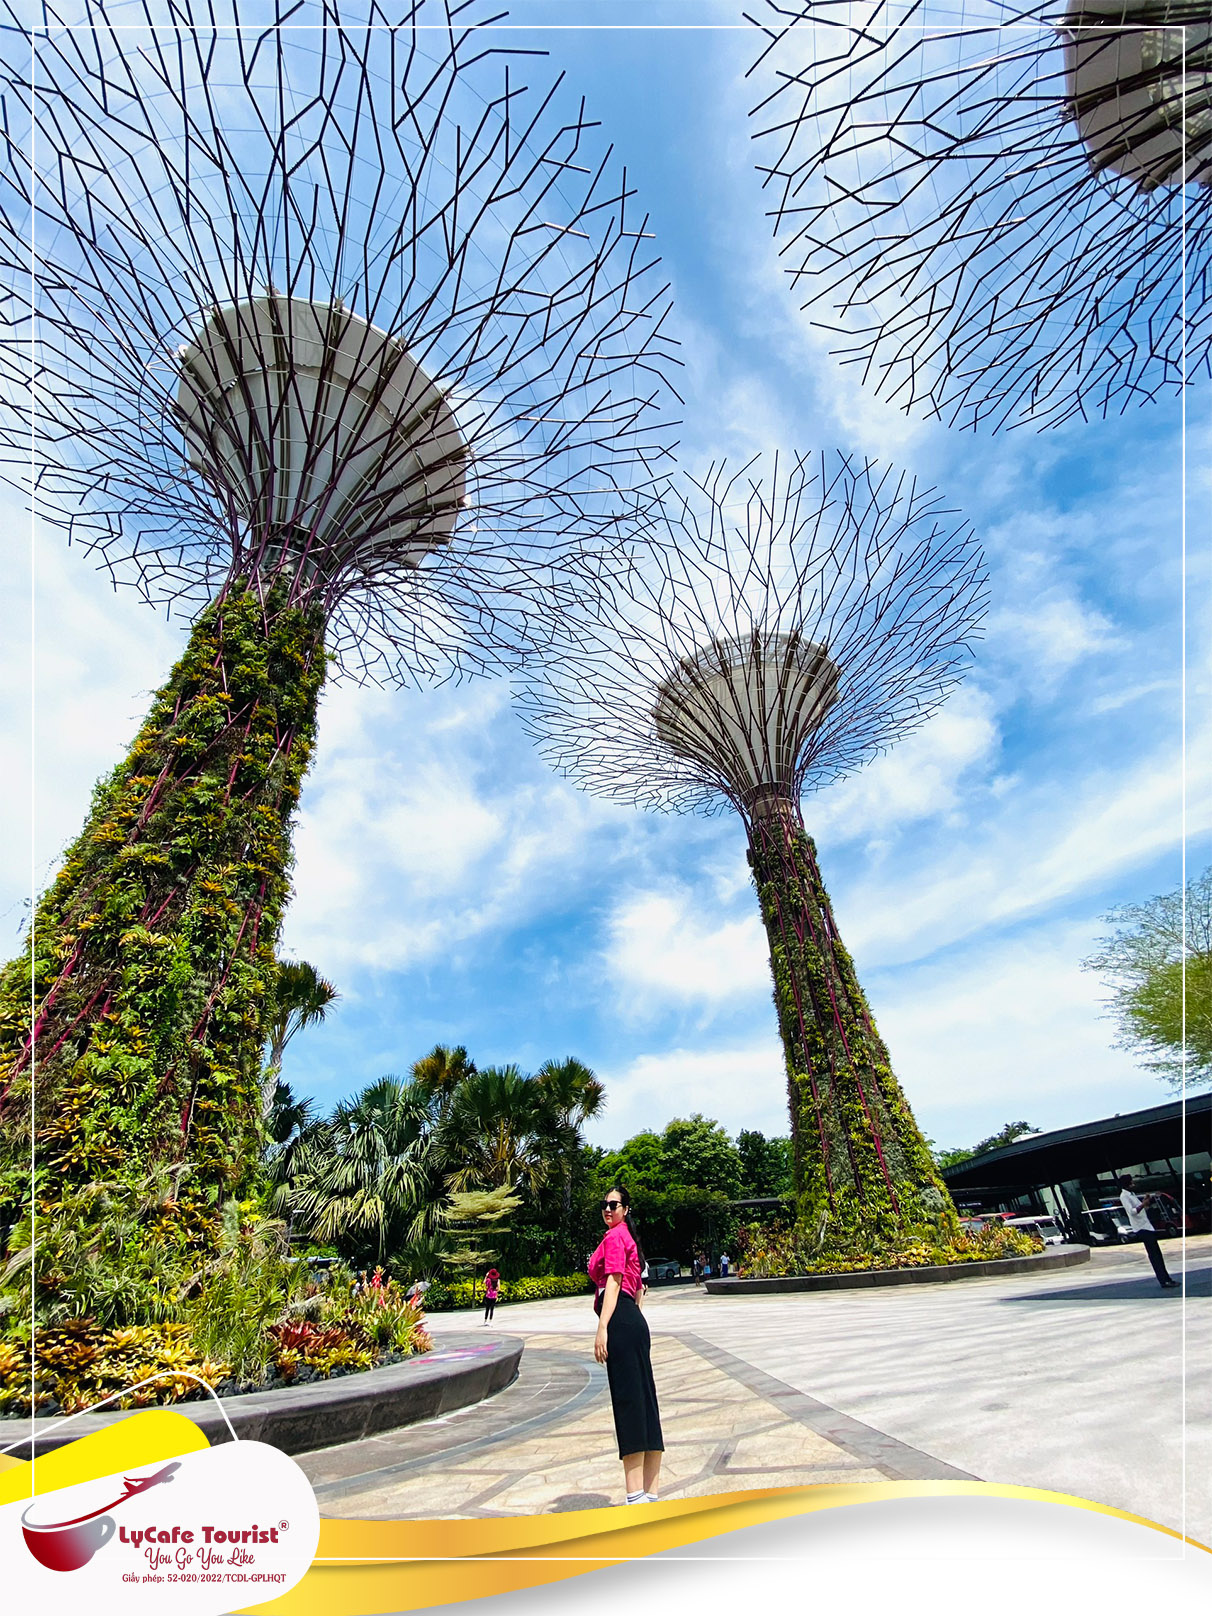 (Gardens by the Bay) - singapore